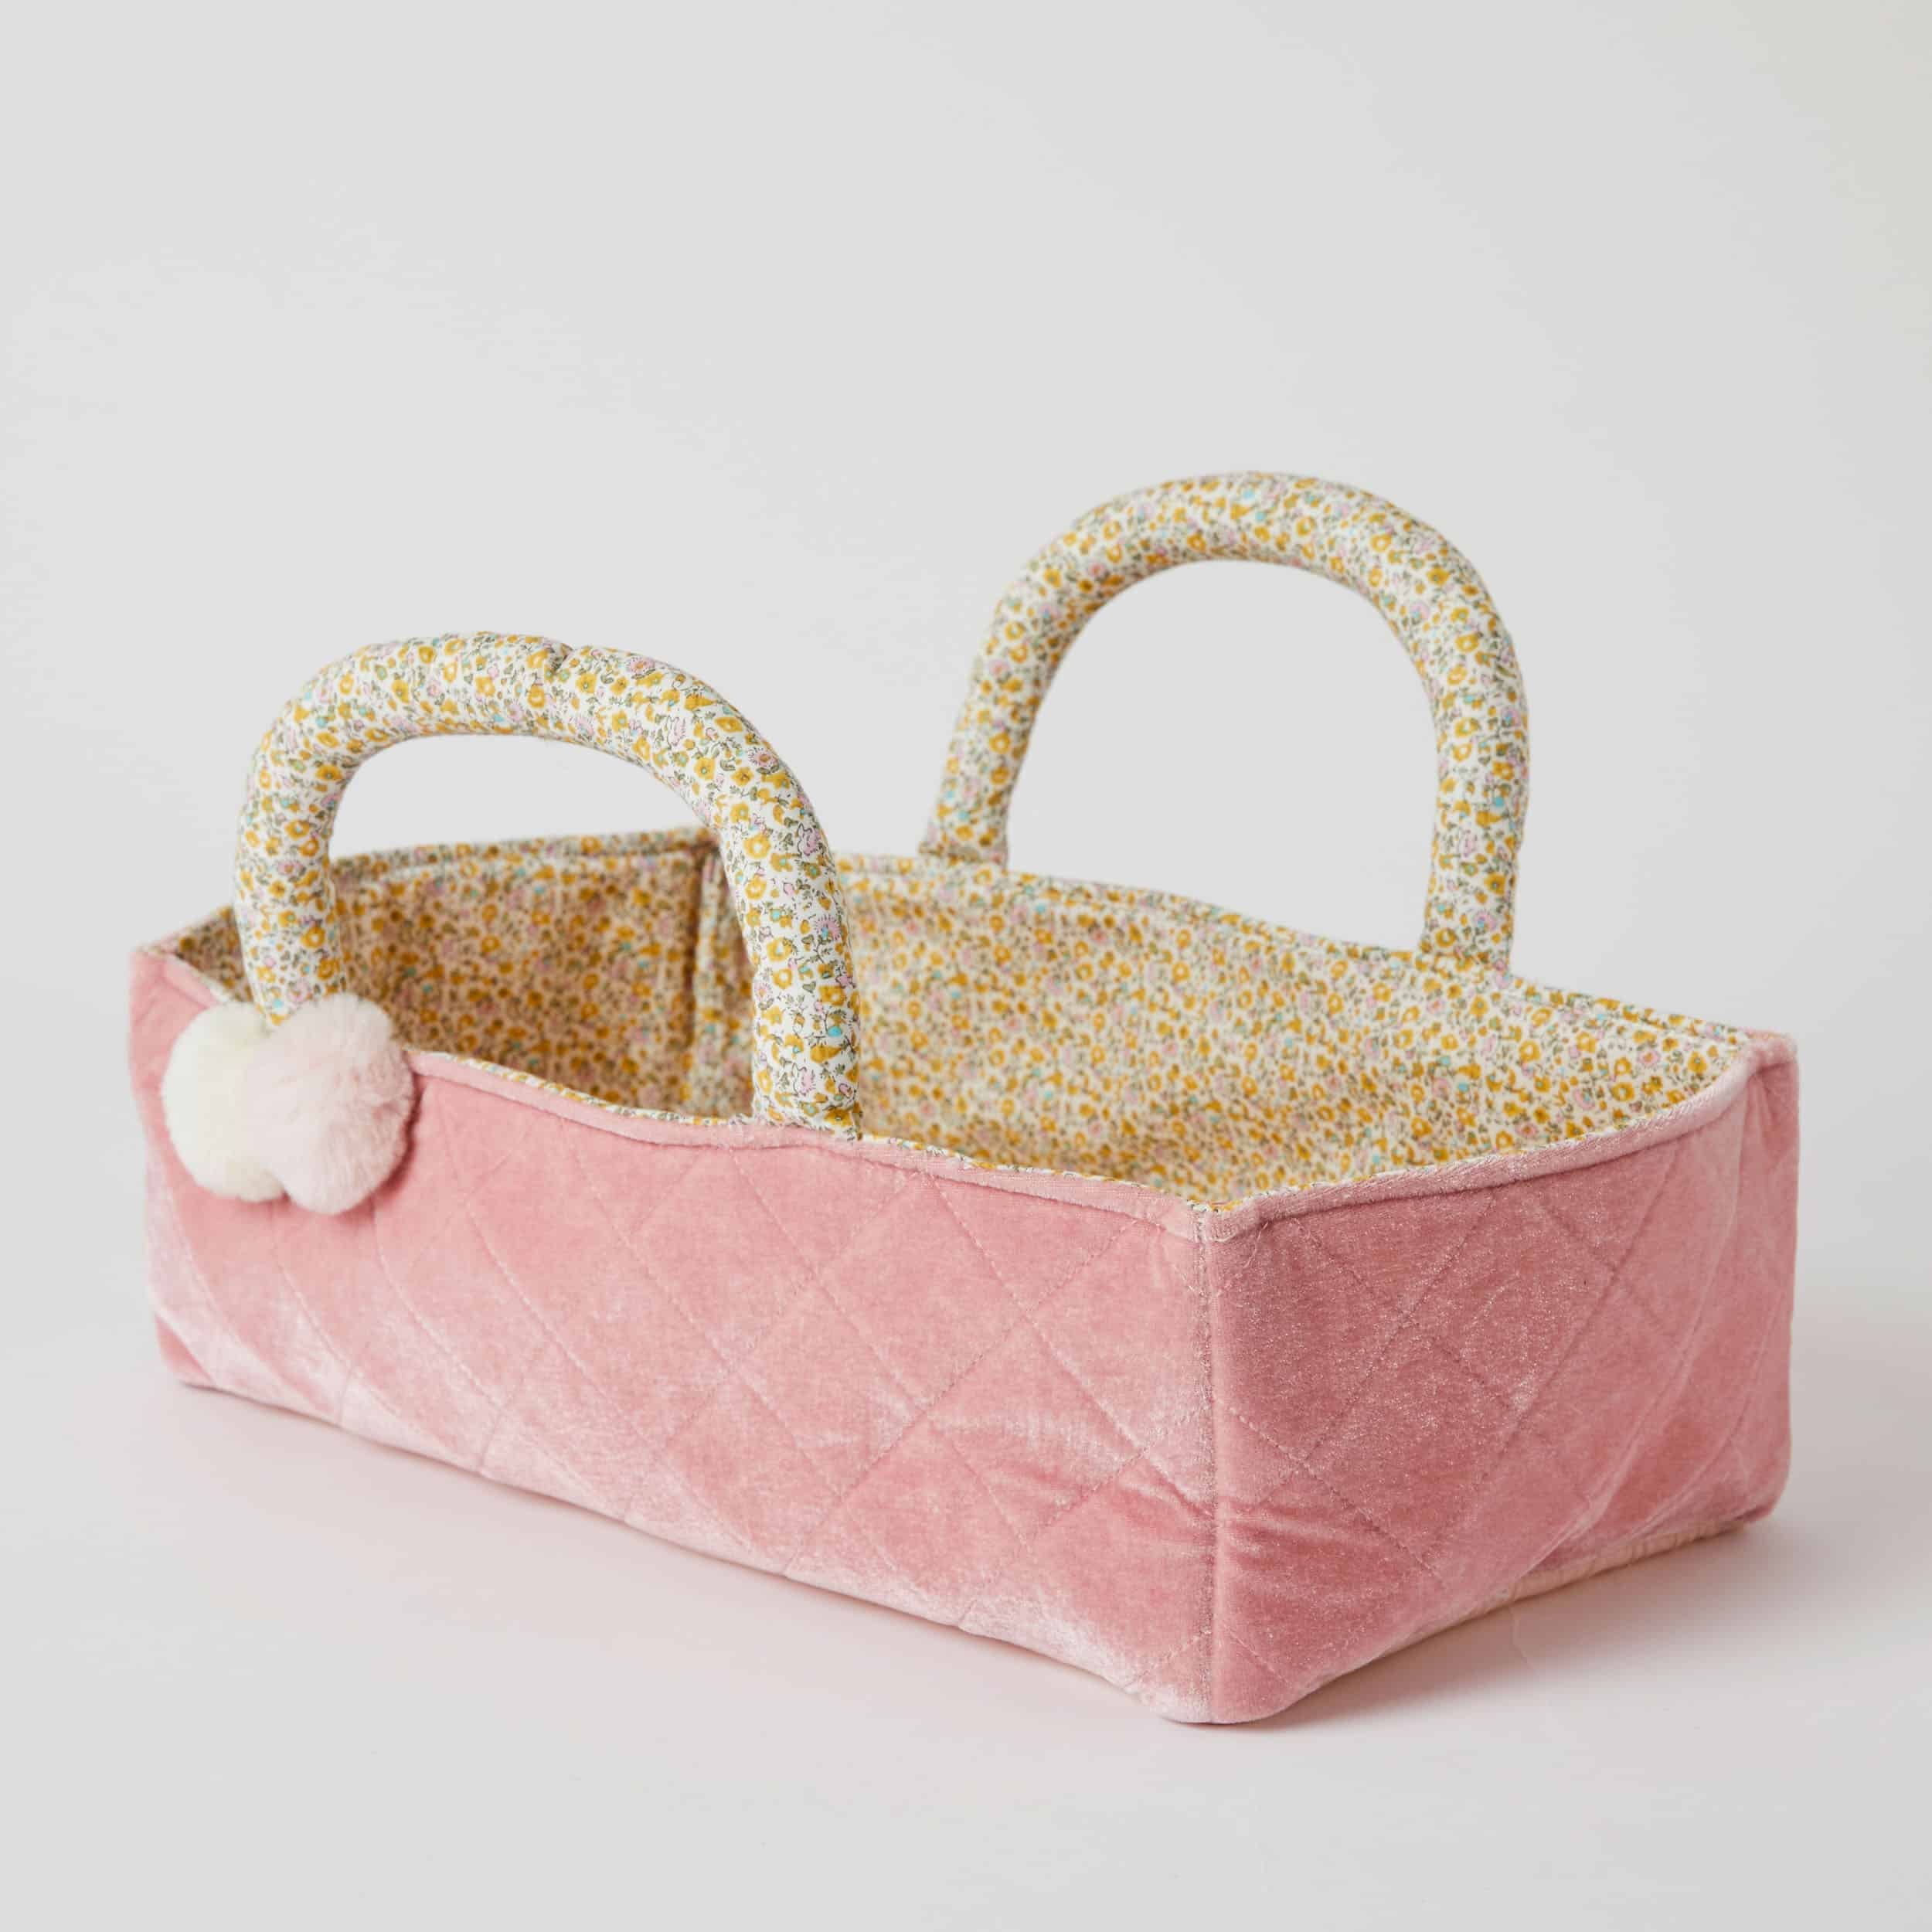 Doll & Teddy Carry Cot | Jiggle & Giggle